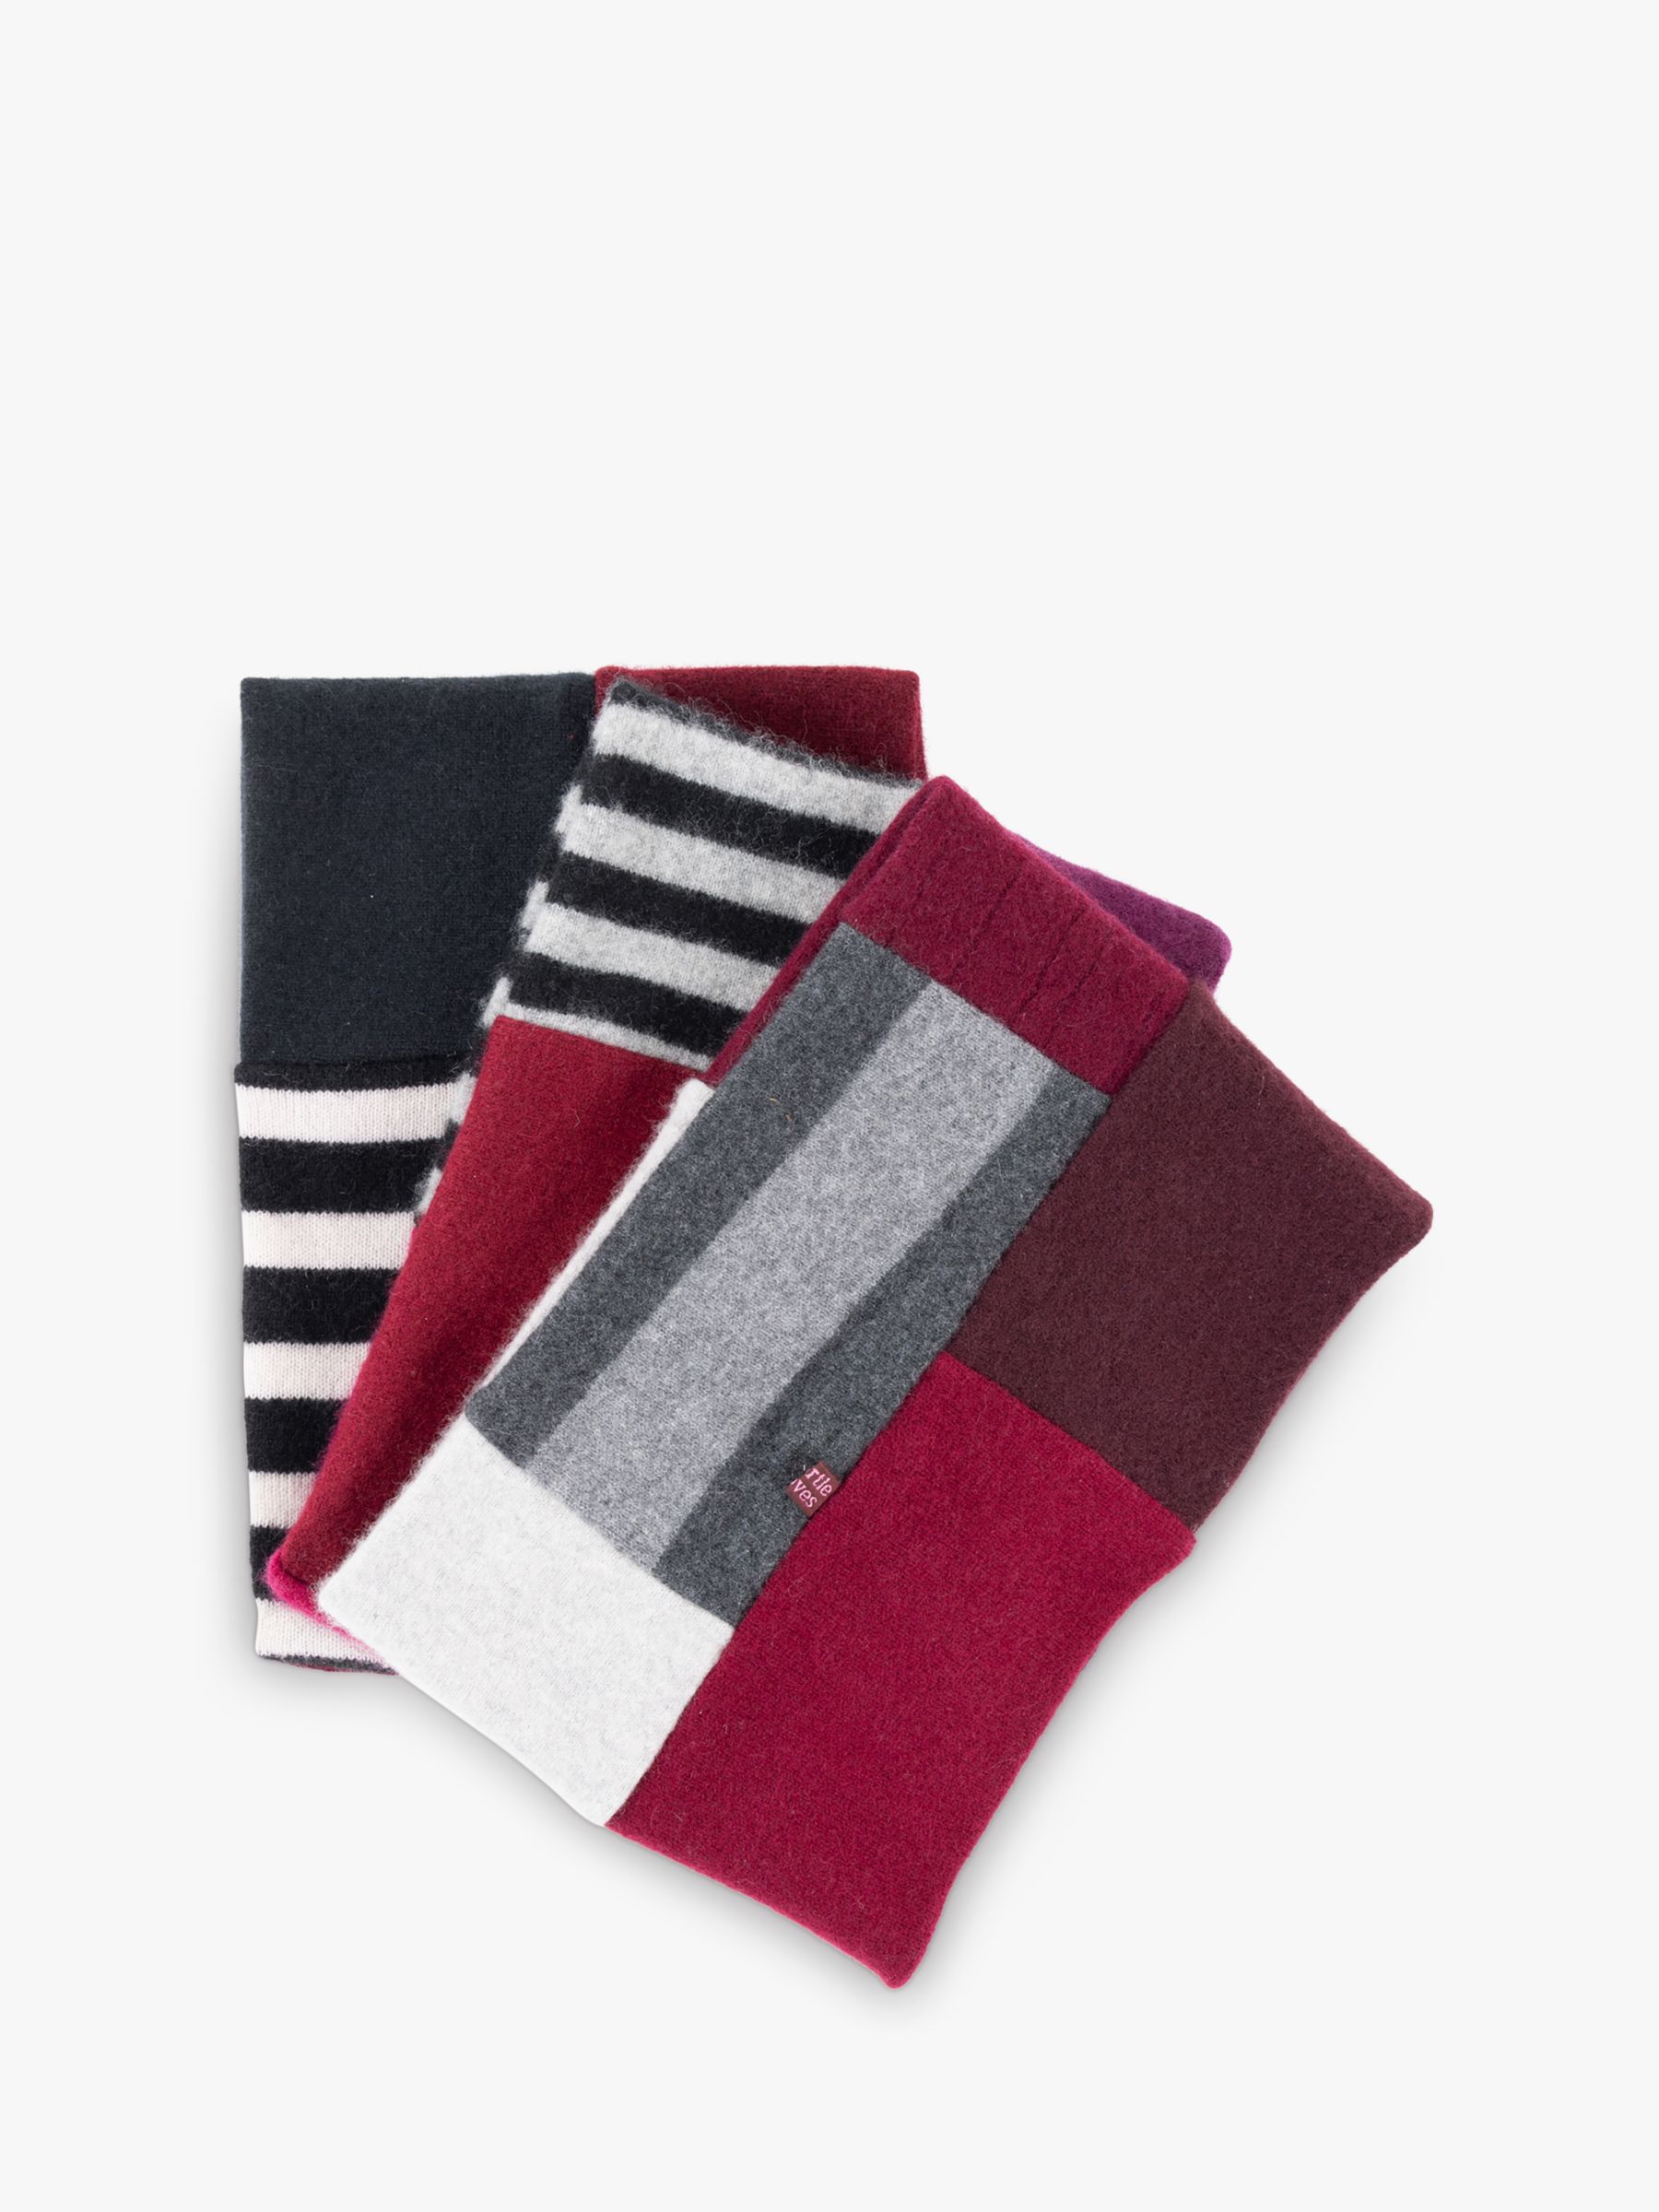 Buy Celtic & Co. Recycled Cashmere Neckwarmer, Mixed Reds Online at johnlewis.com